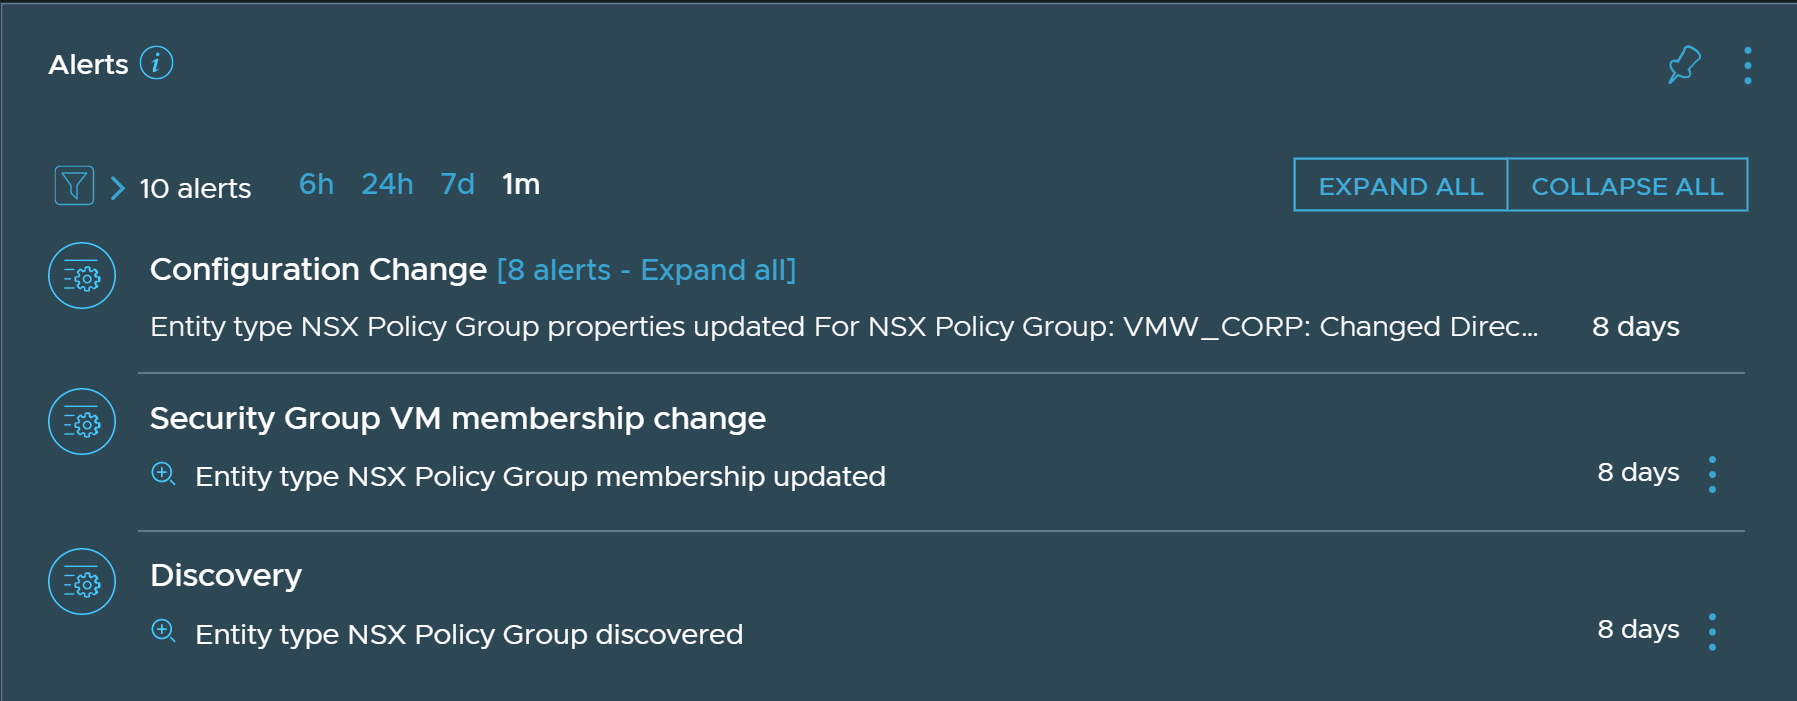 List of alerts displayed for a NSX policy group.